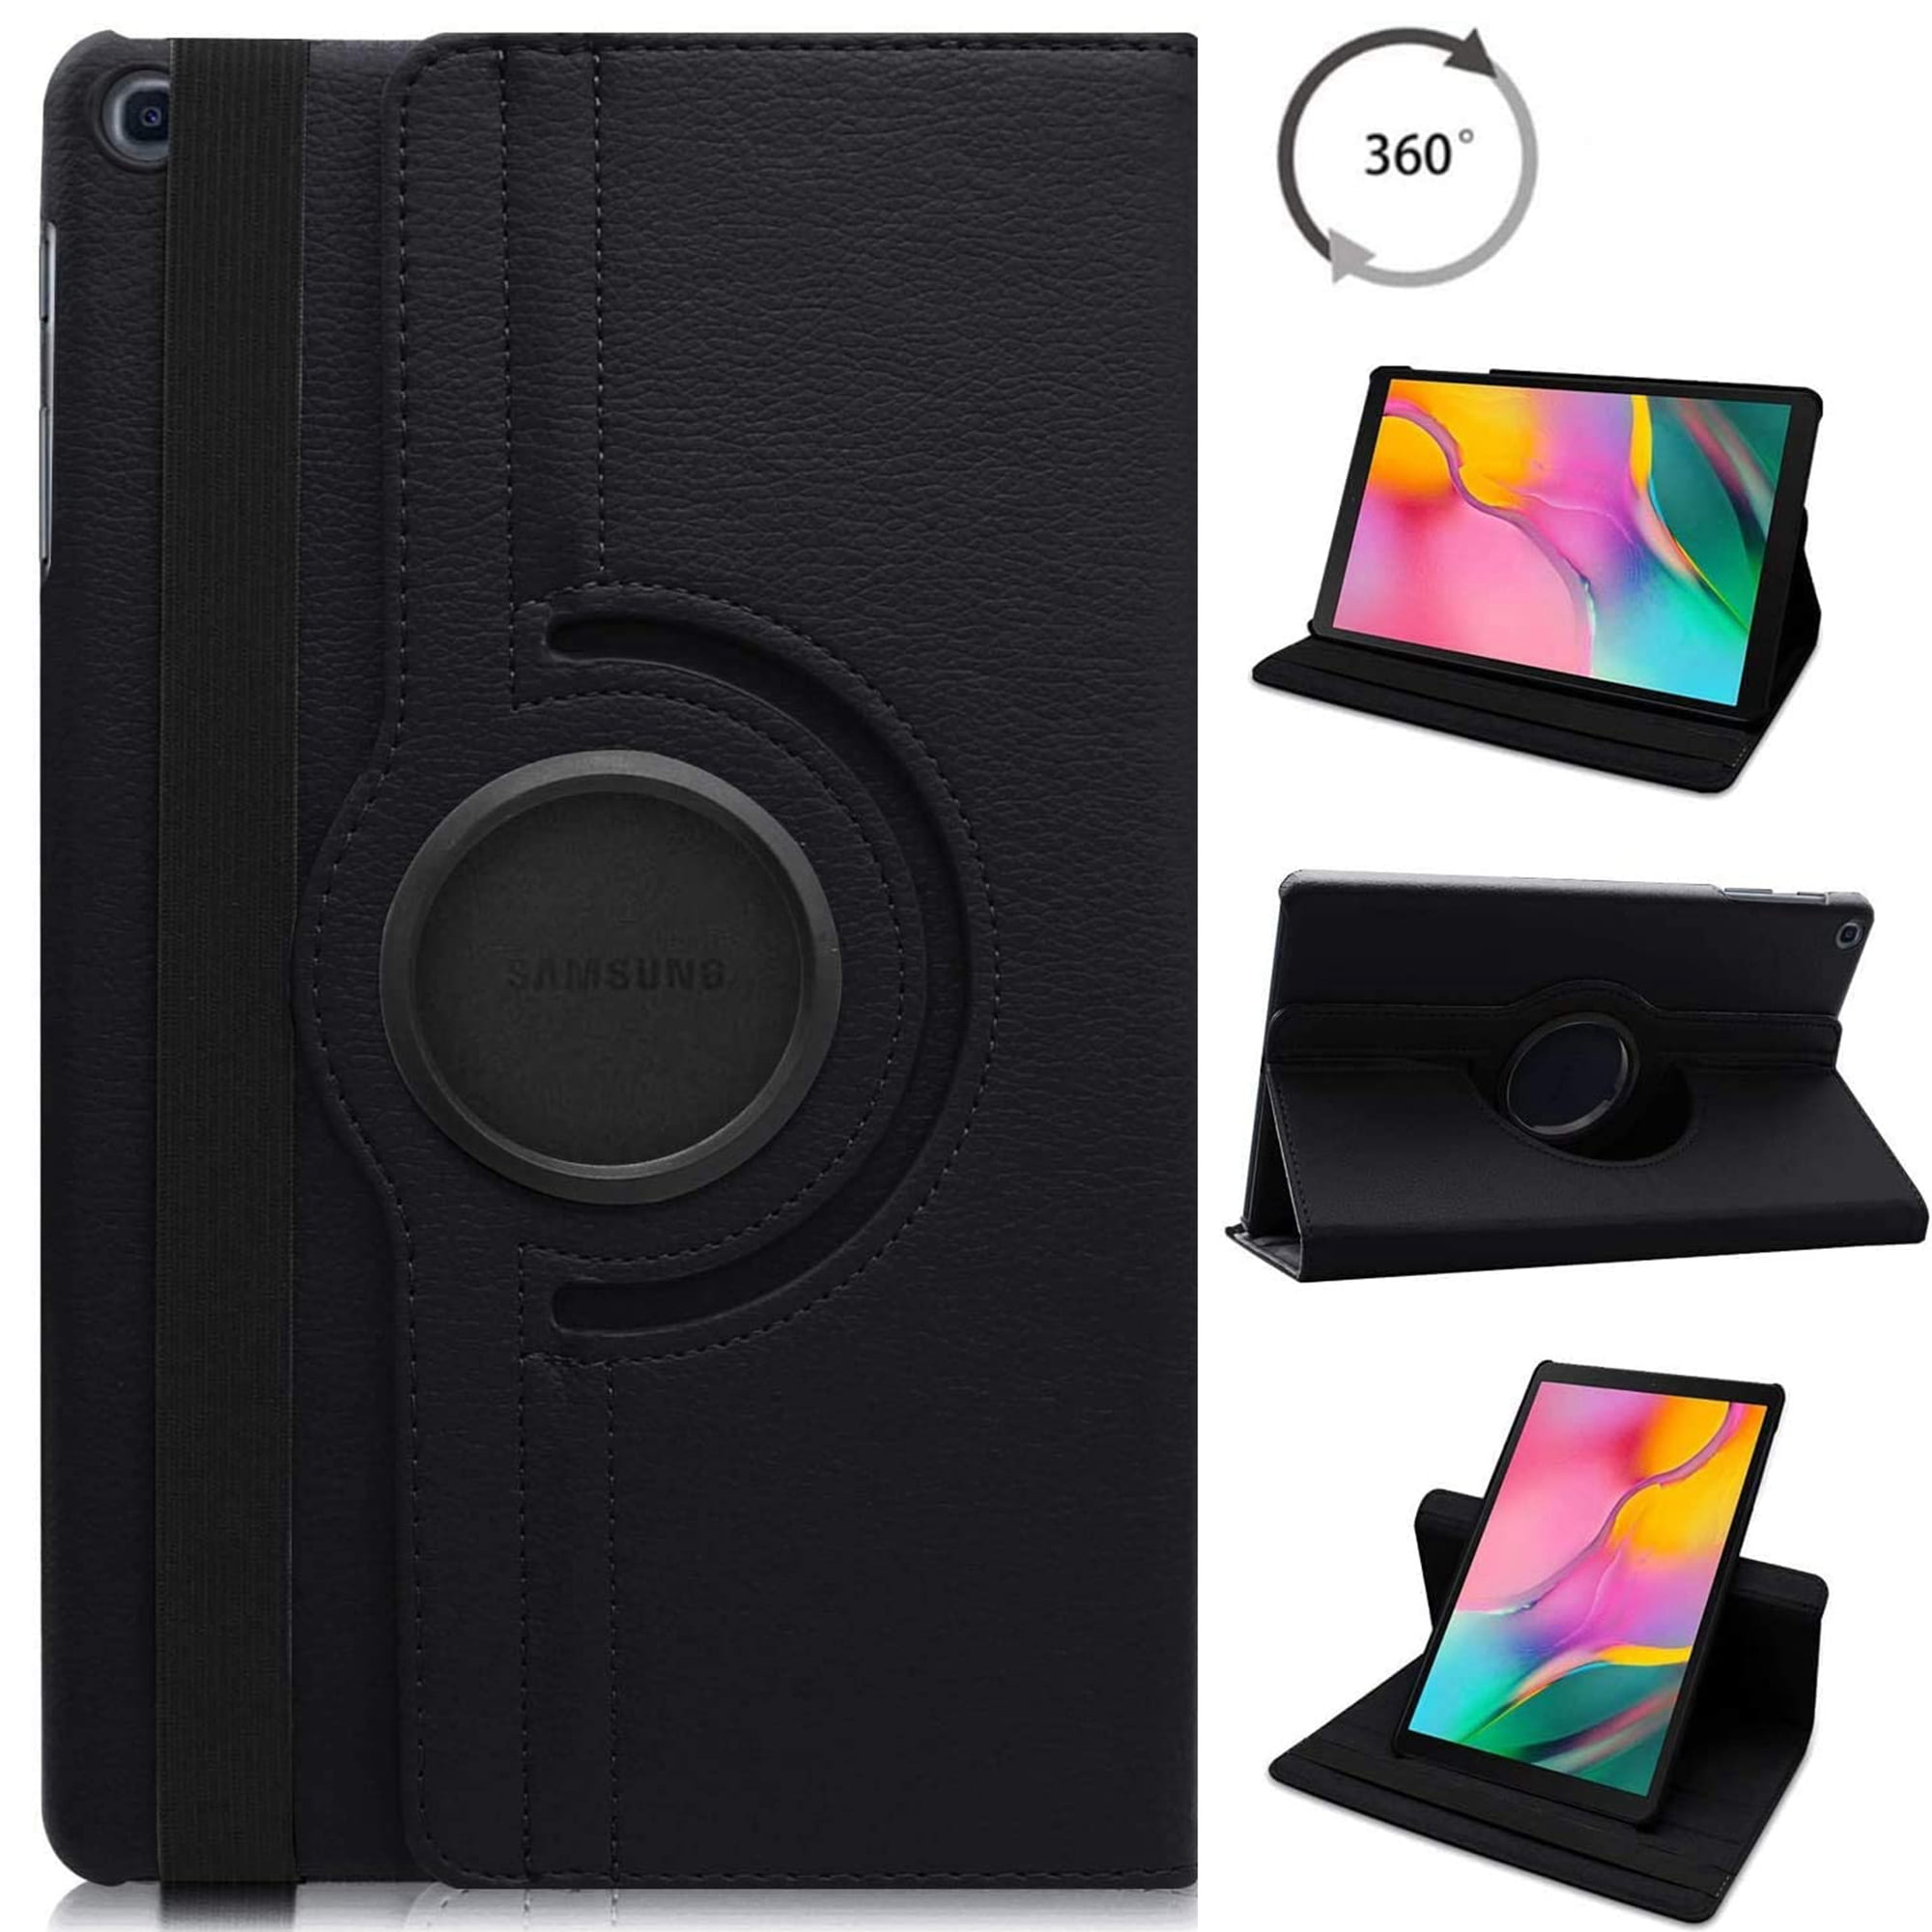 Slim PU Leather Skin Stand Folio Smart Cover for Galaxy Tab S6 Lite 2020 with Pen Holder Uliking Case for Samsung Galaxy Tab S6 Lite 10.4 inch Tablet 2020 Released Unicorn Auto Wake/Sleep 